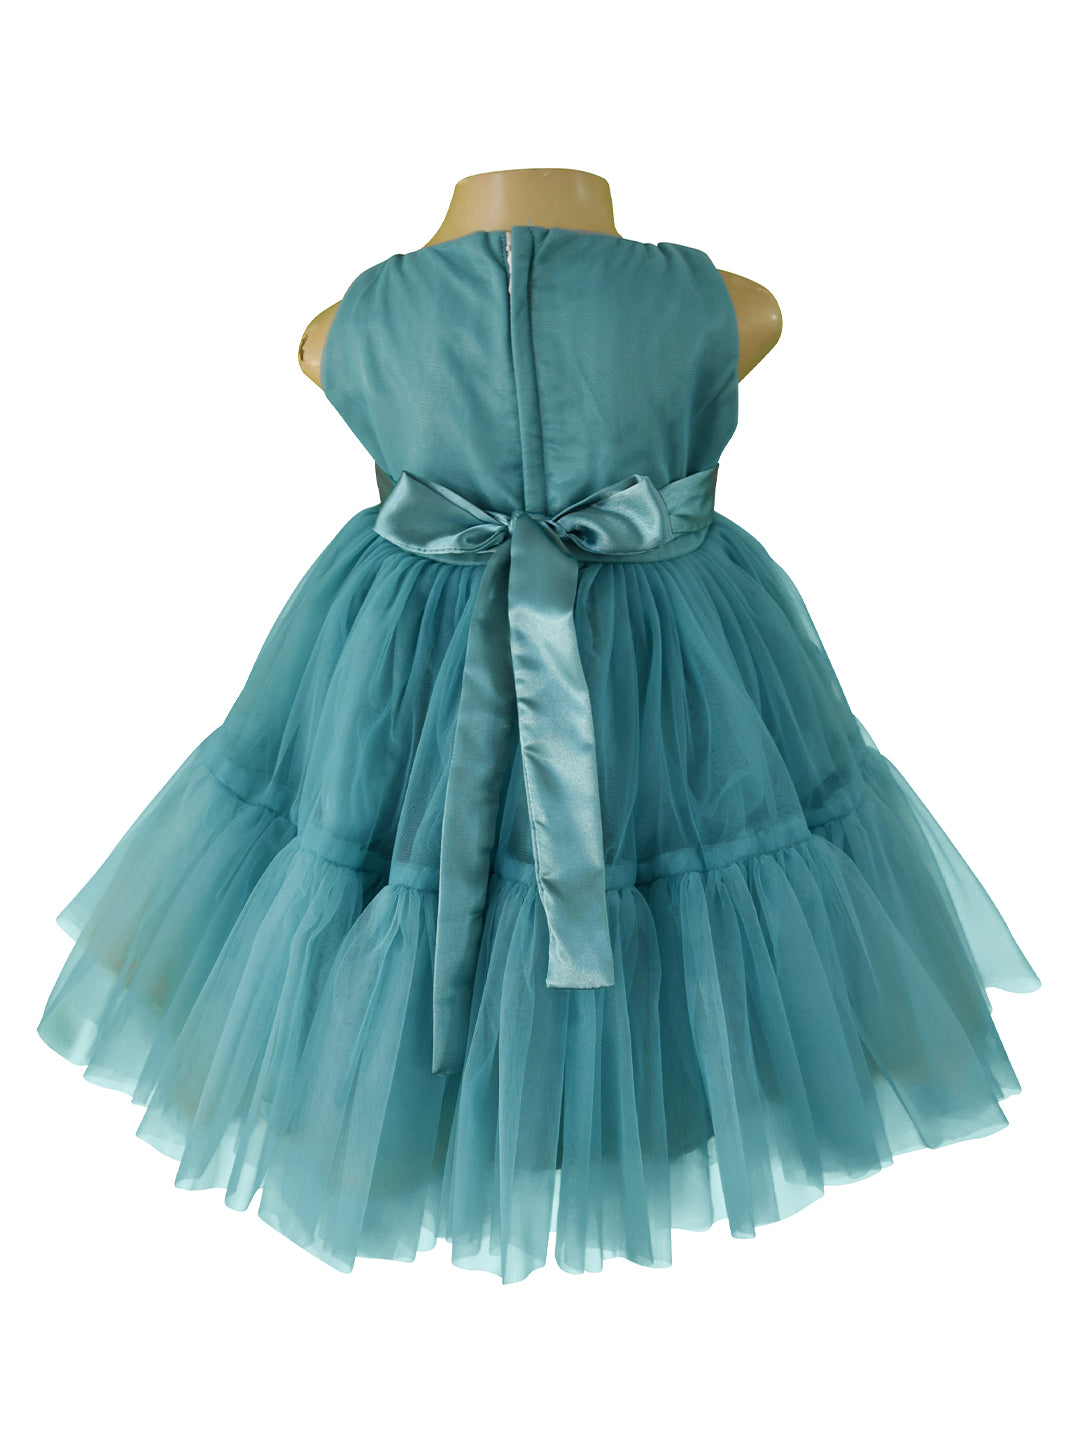 Aegean Teal Embroidered Tiered Dress